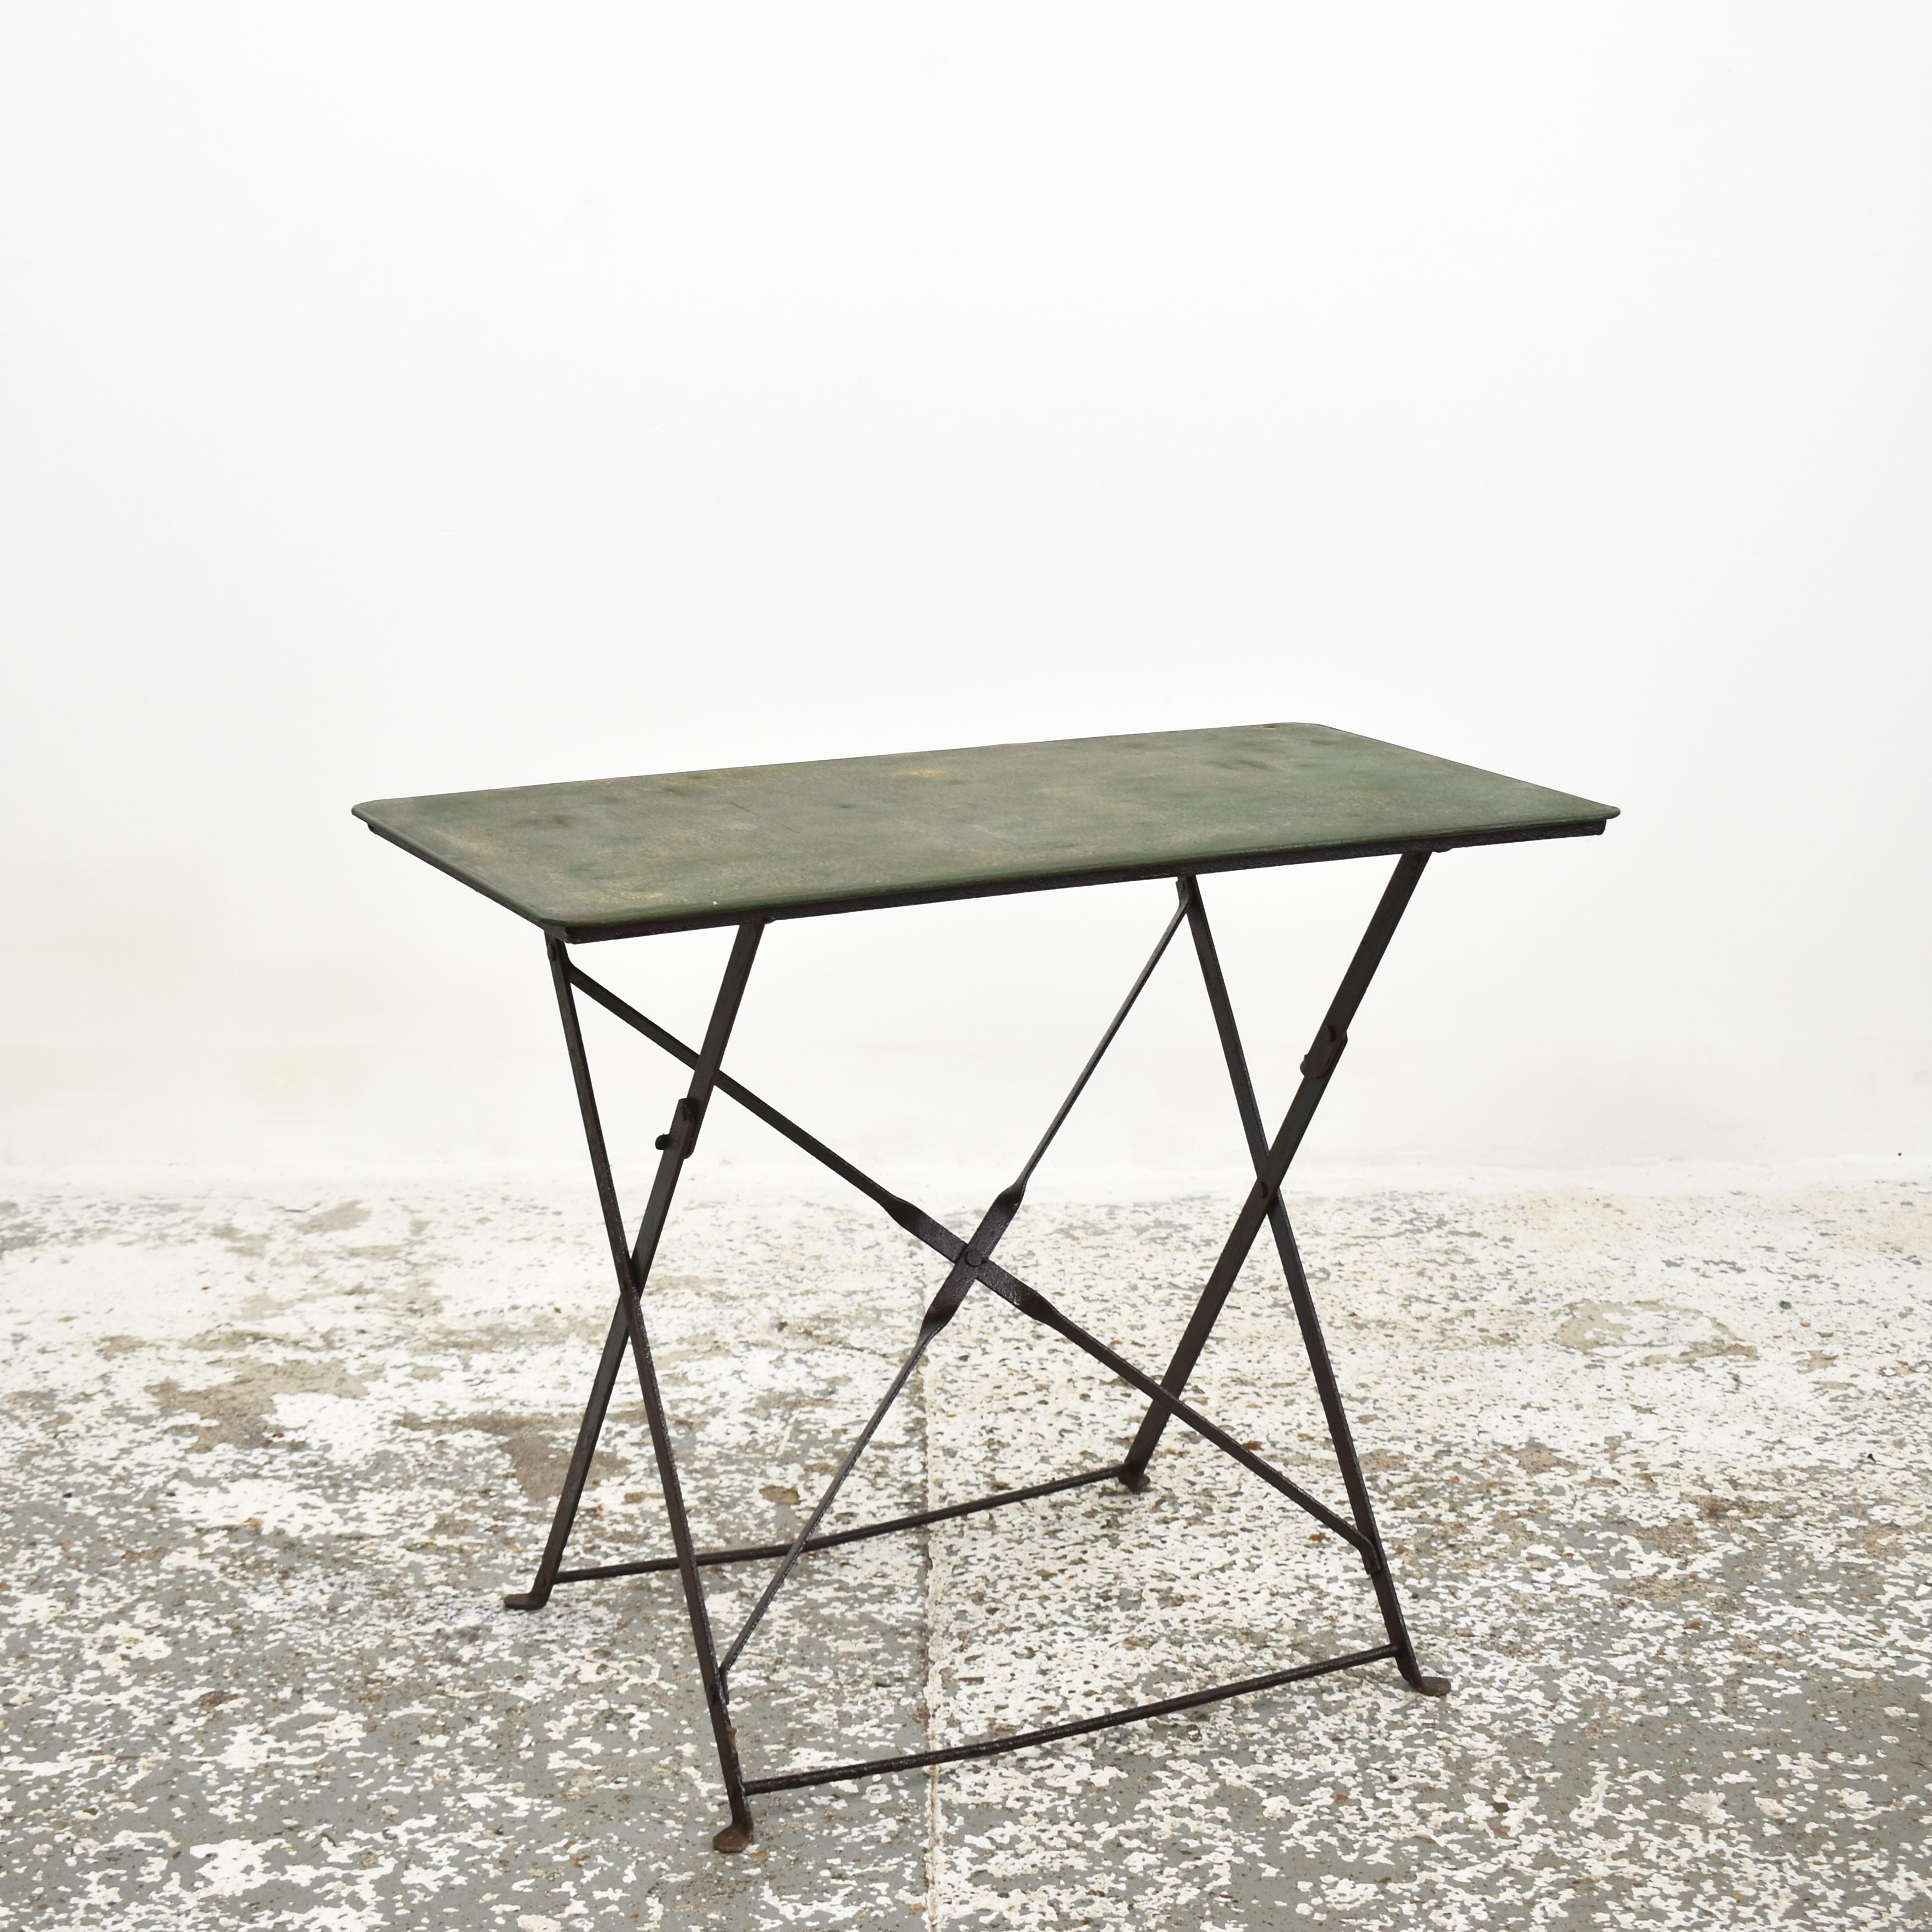 Vintage French Garden Bistro Table -K

An original green metal bistro table with folding legs. The table is solid with metal legs. There is some wear in places to the top and legs giving it lots of character.

Dimensions:

Height:70.5cm
Width: